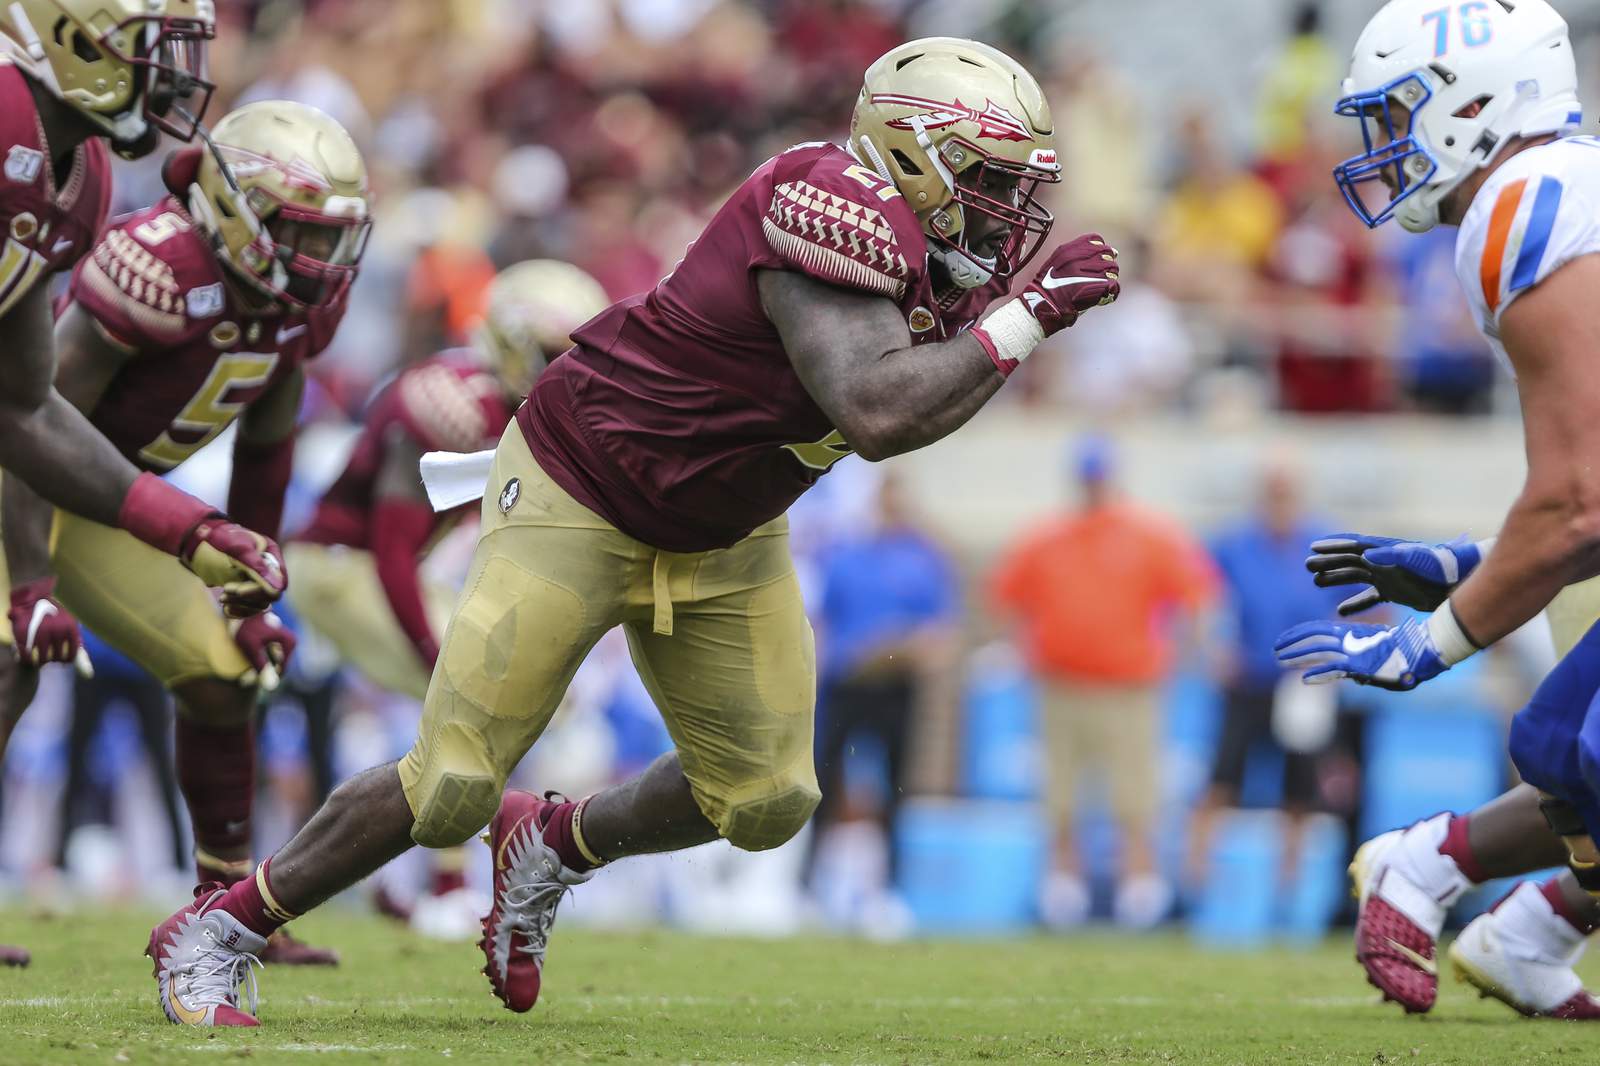 Florida State vs. NC State: How to watch, stream, listen